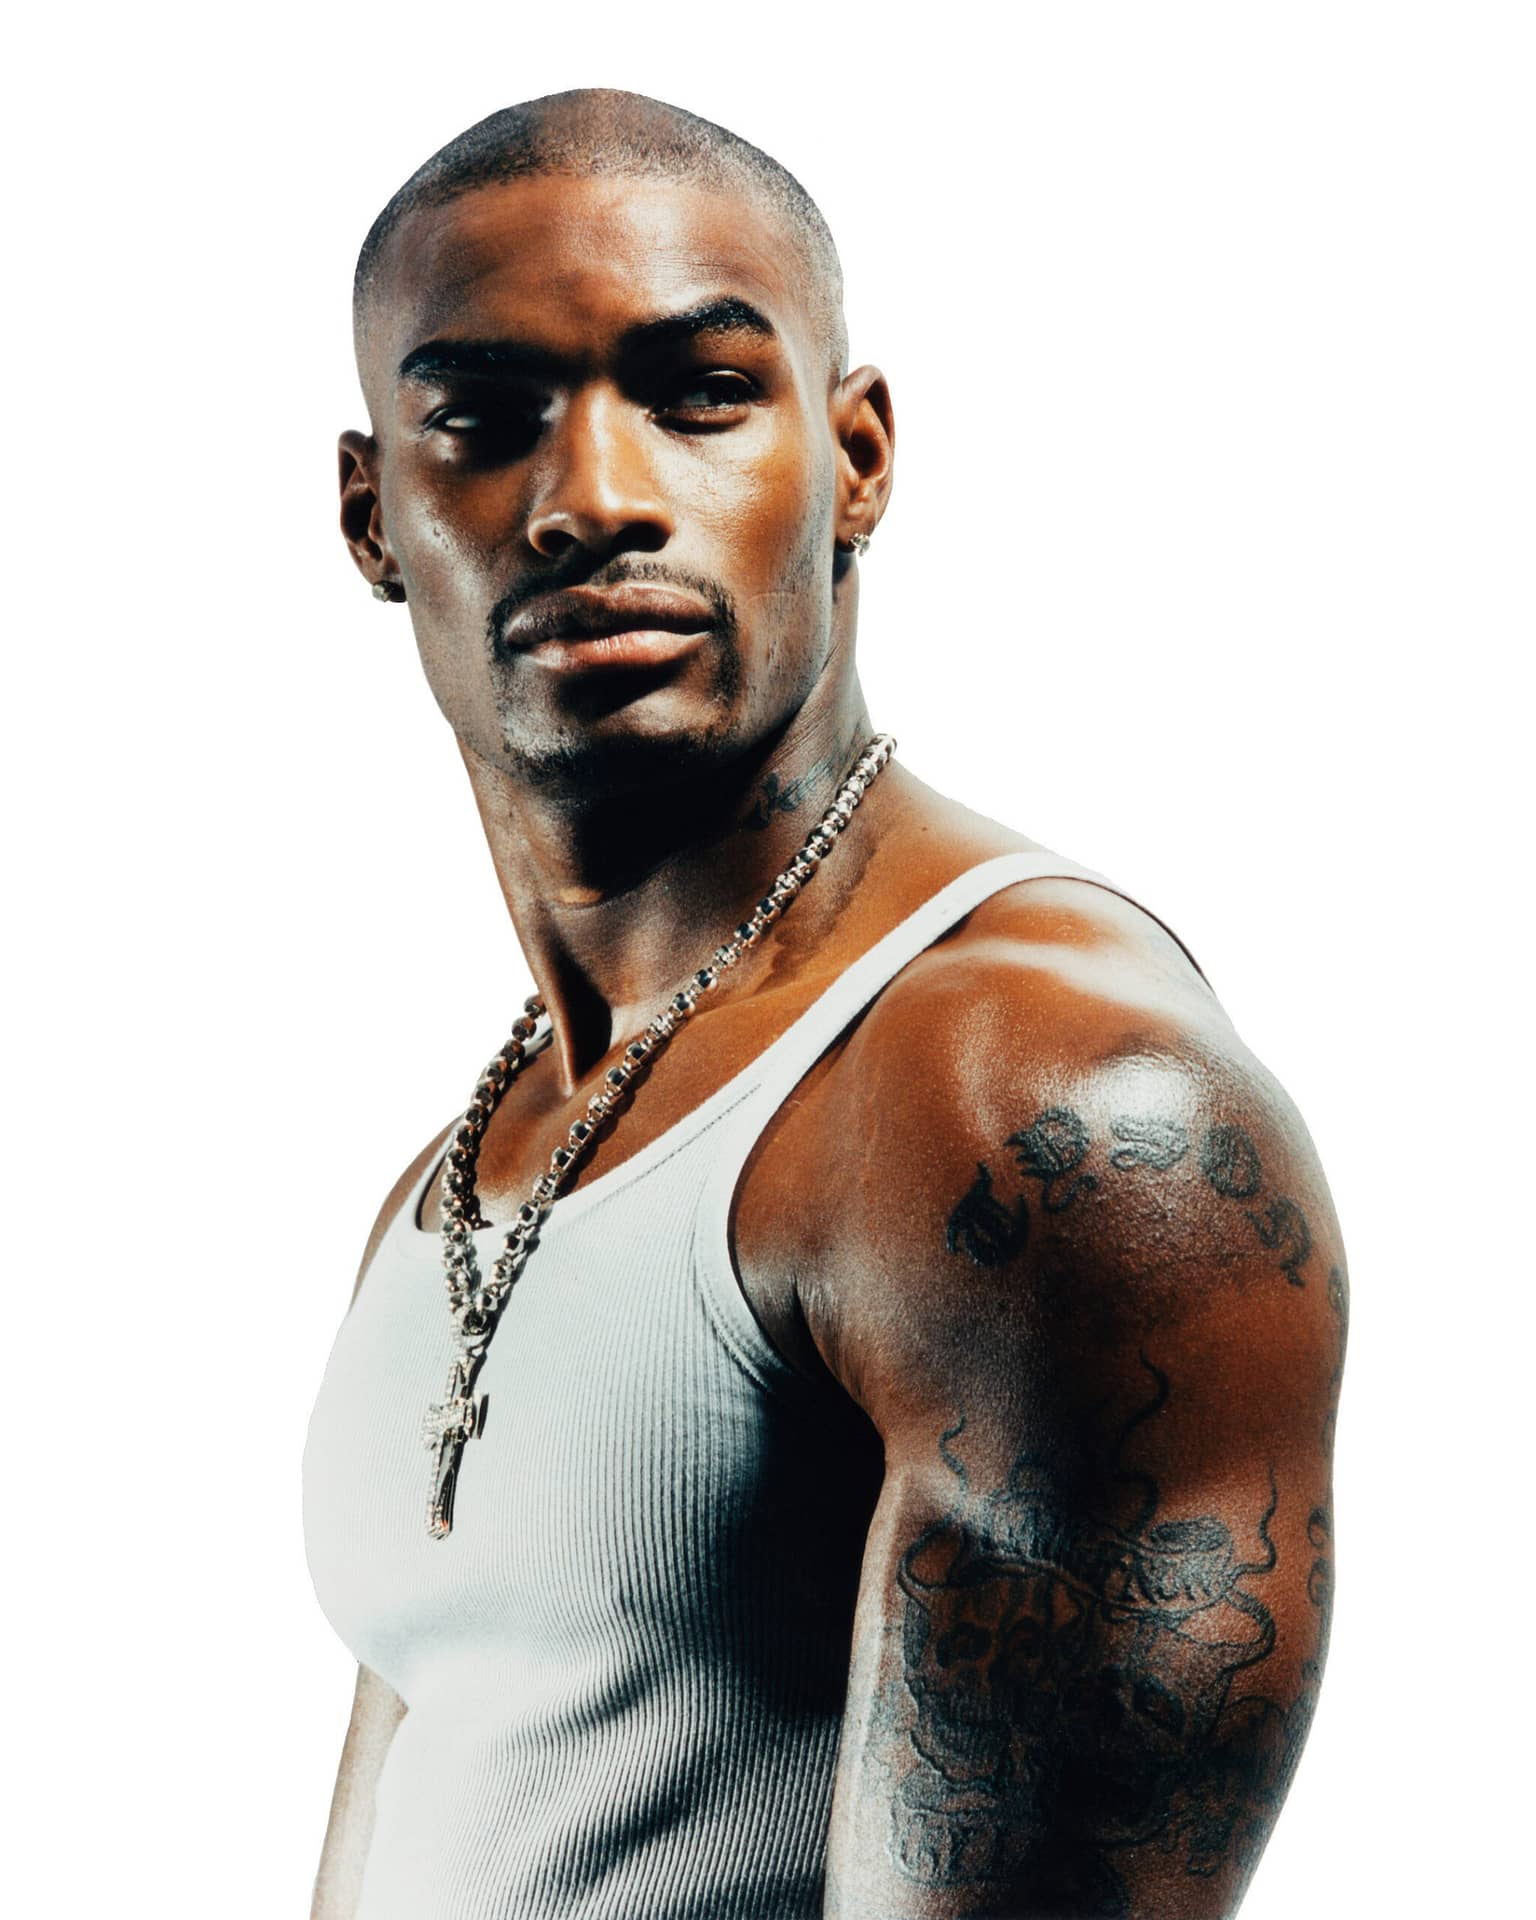 Chippendales Tyson Beckford